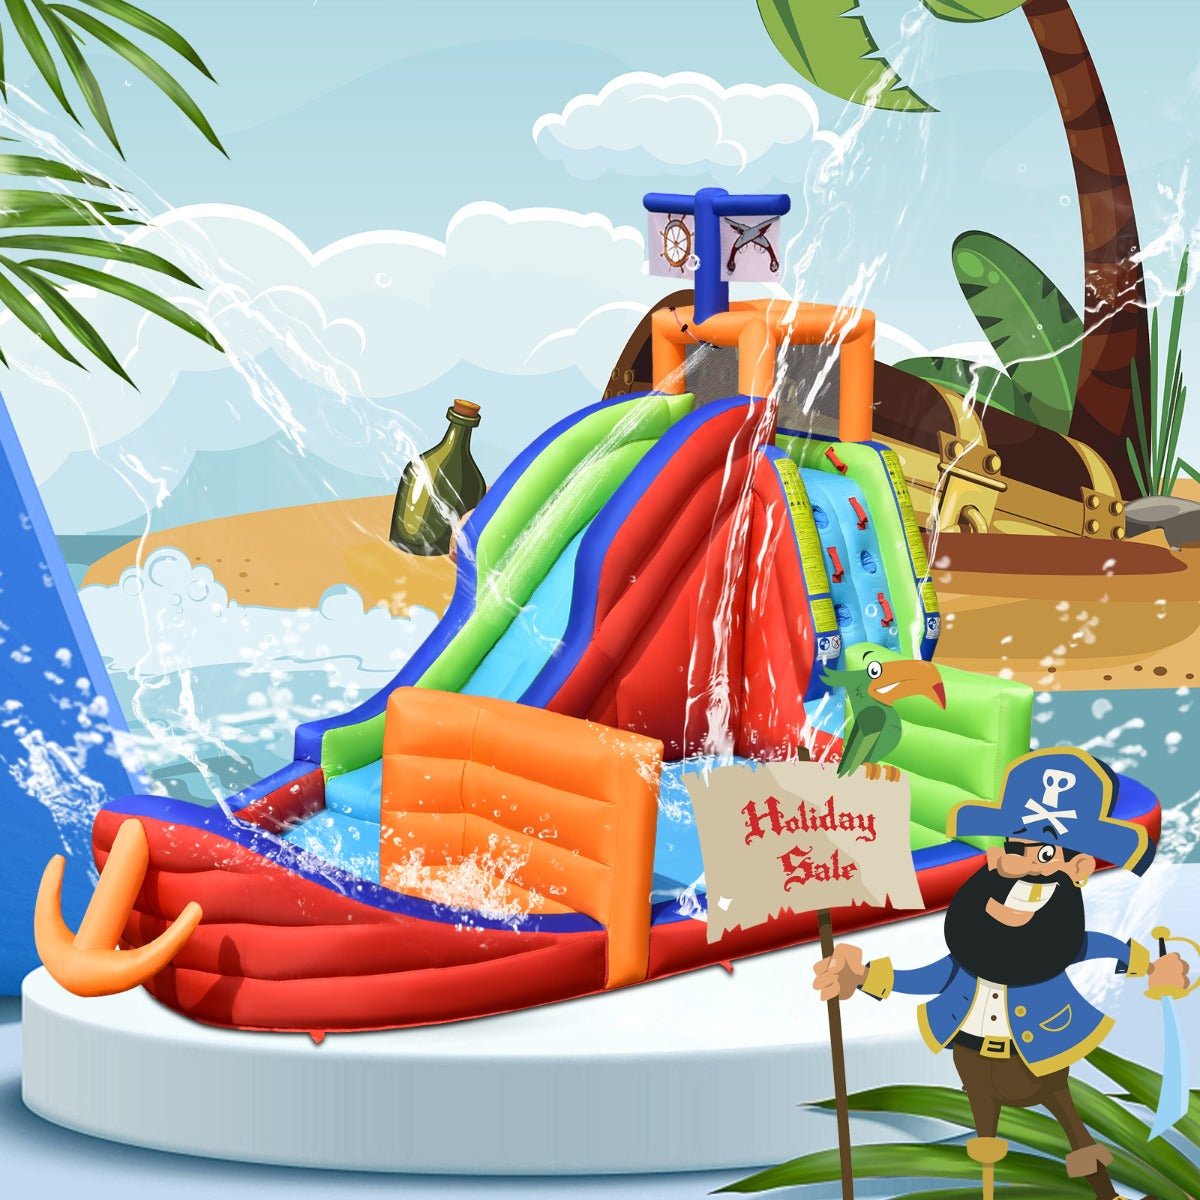 Set Sail for Fun: 6-in-1 Inflatable Pirate Ship Bounce House with Long Slide